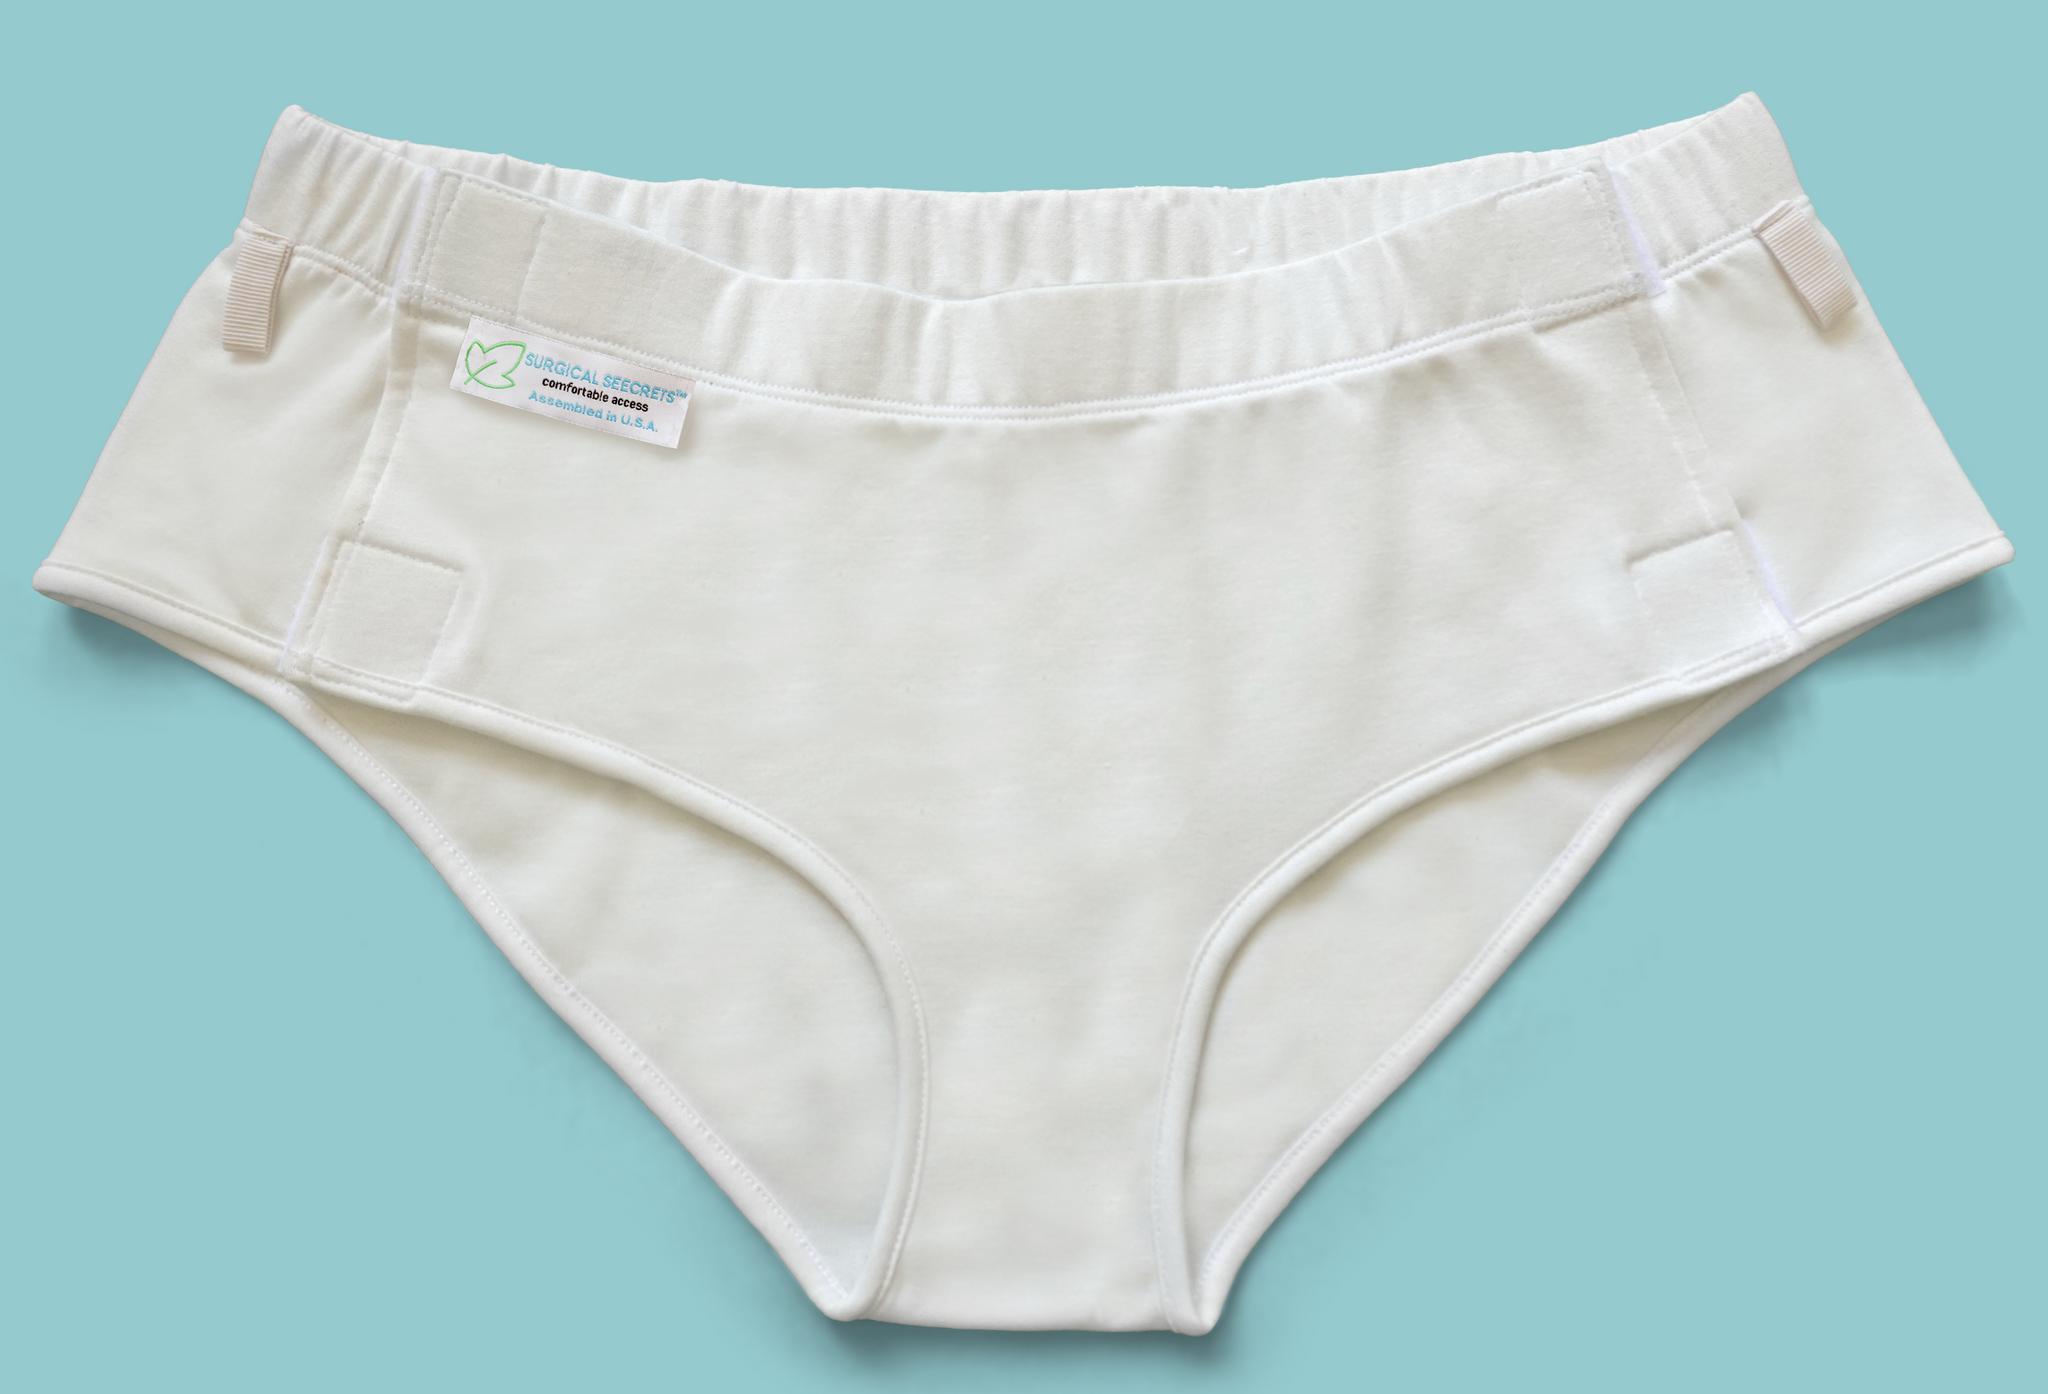 Seecret Undies - for comfortable access to your wounds – Surgical Seecrets